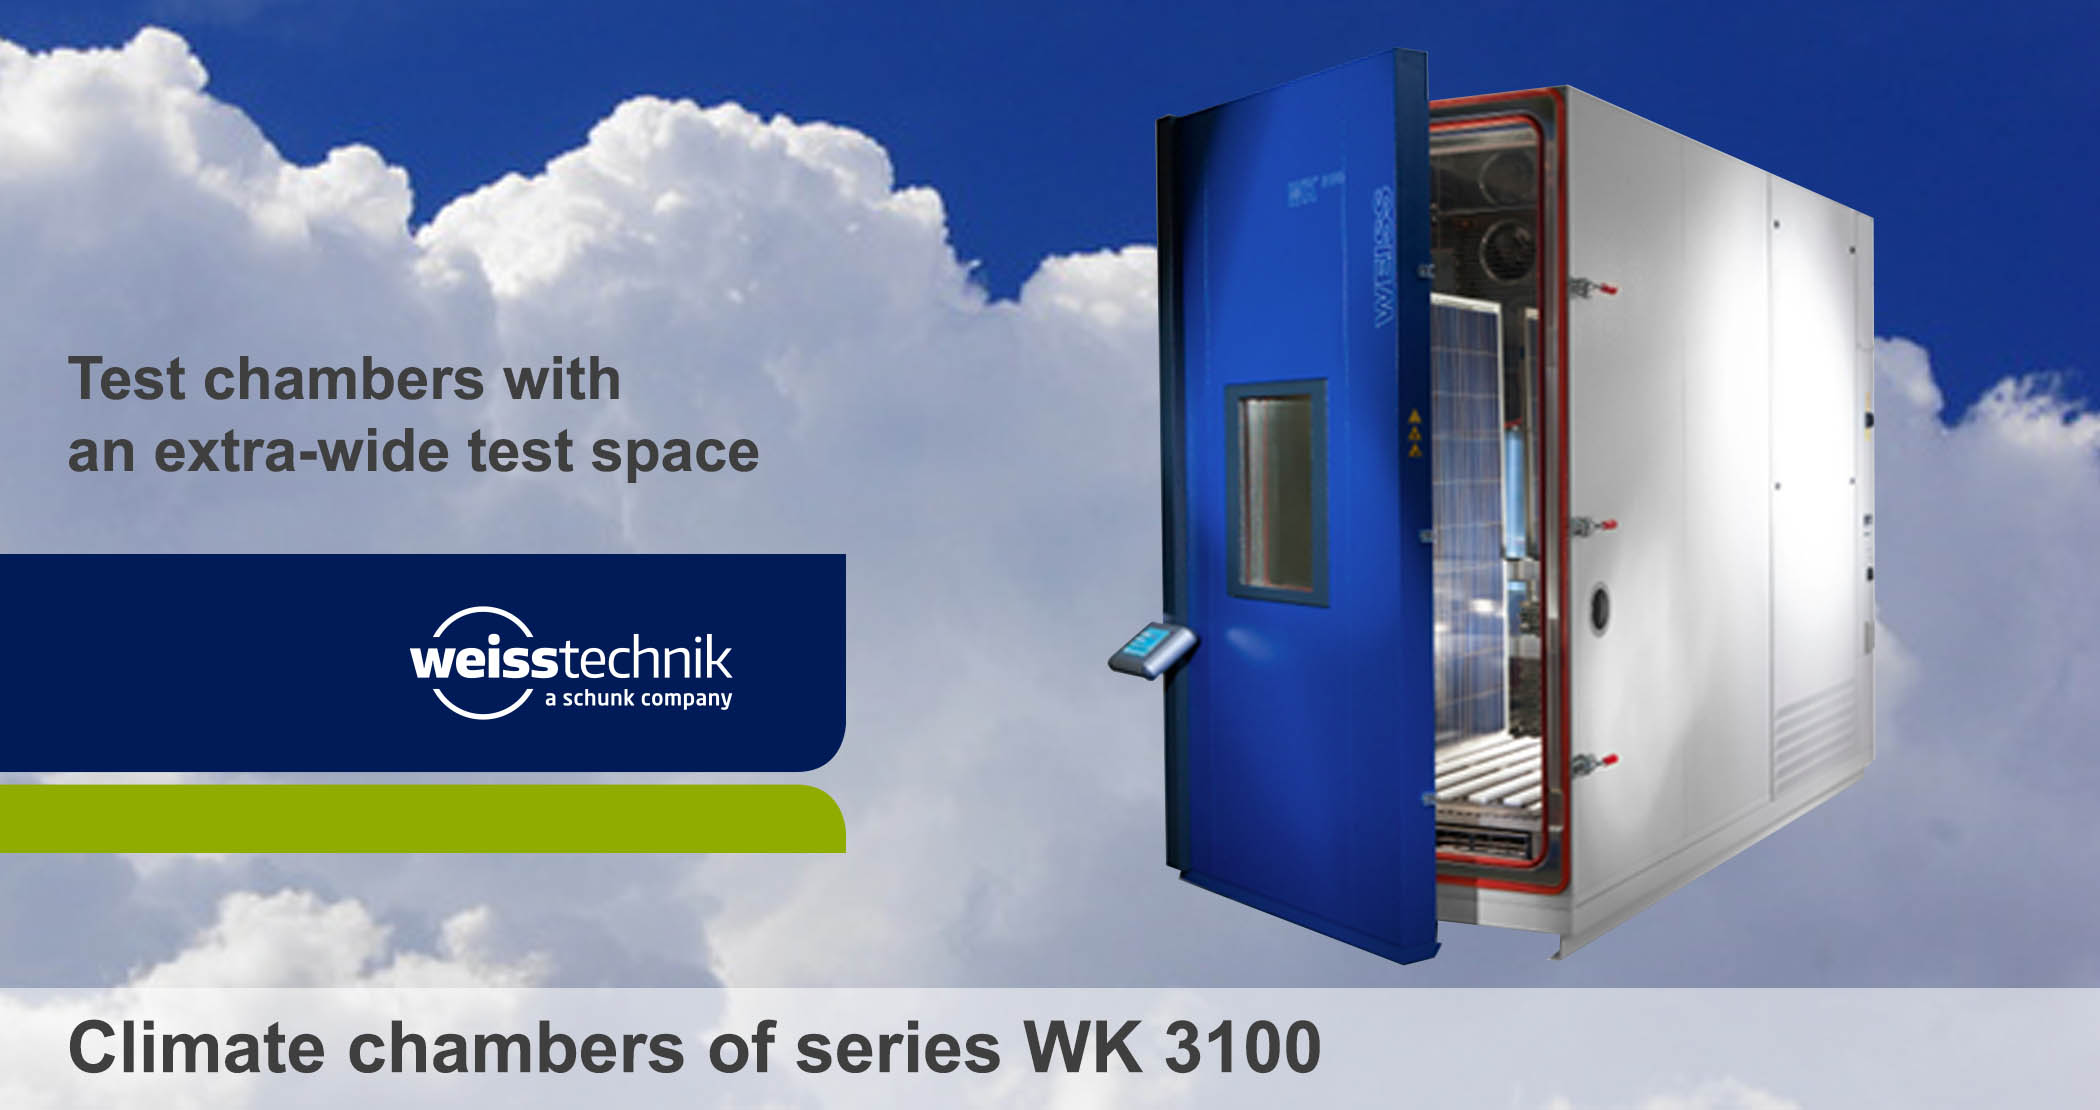 Test chambers, extra wide test space, climate chambers, WK-3100, Weiss